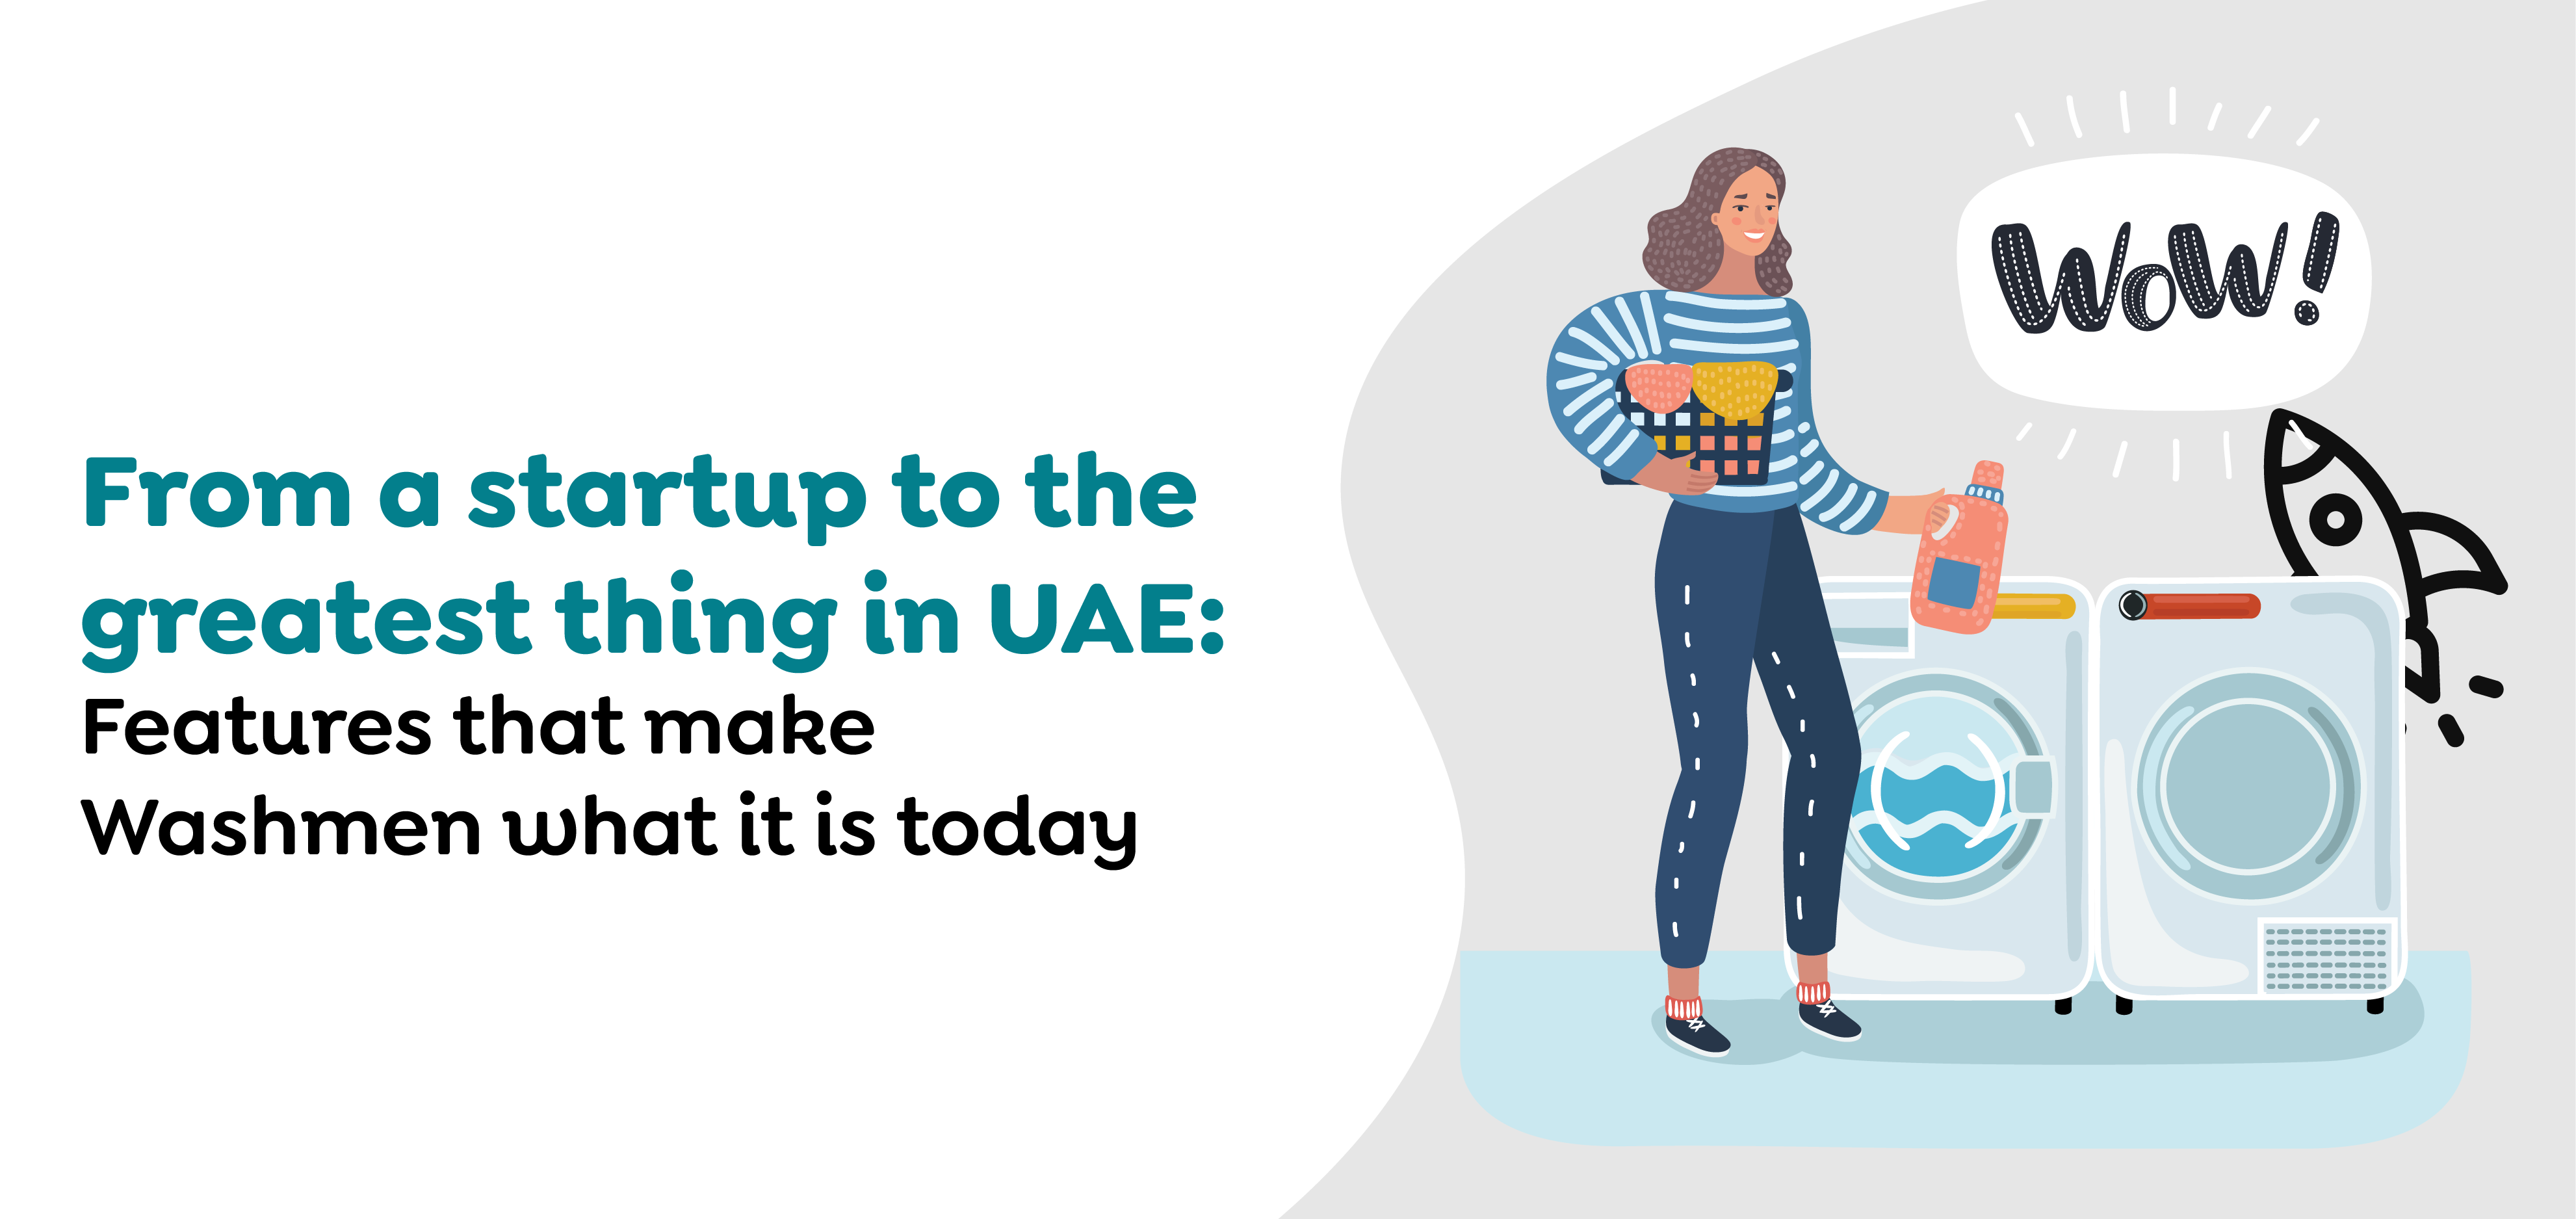 From a startup to the greatest thing in UAE Features that make Washmen what it is today